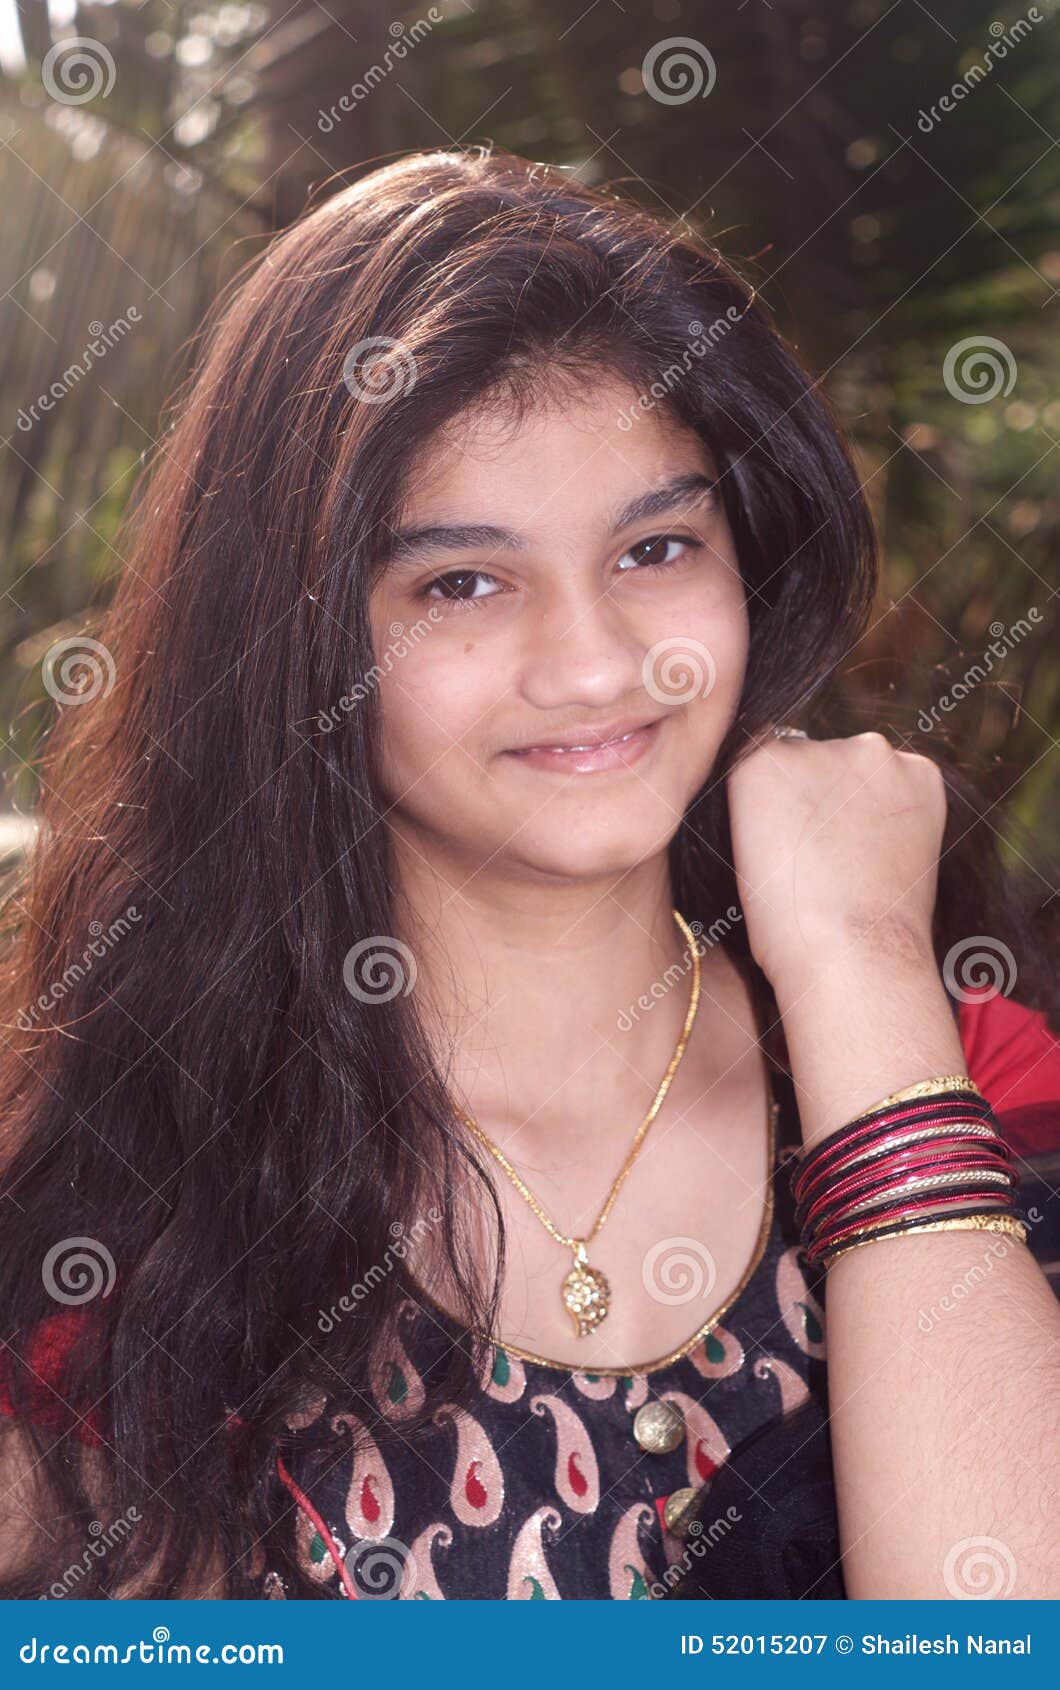 Me and my bangles stock image. Image of candid, clear - 52015207